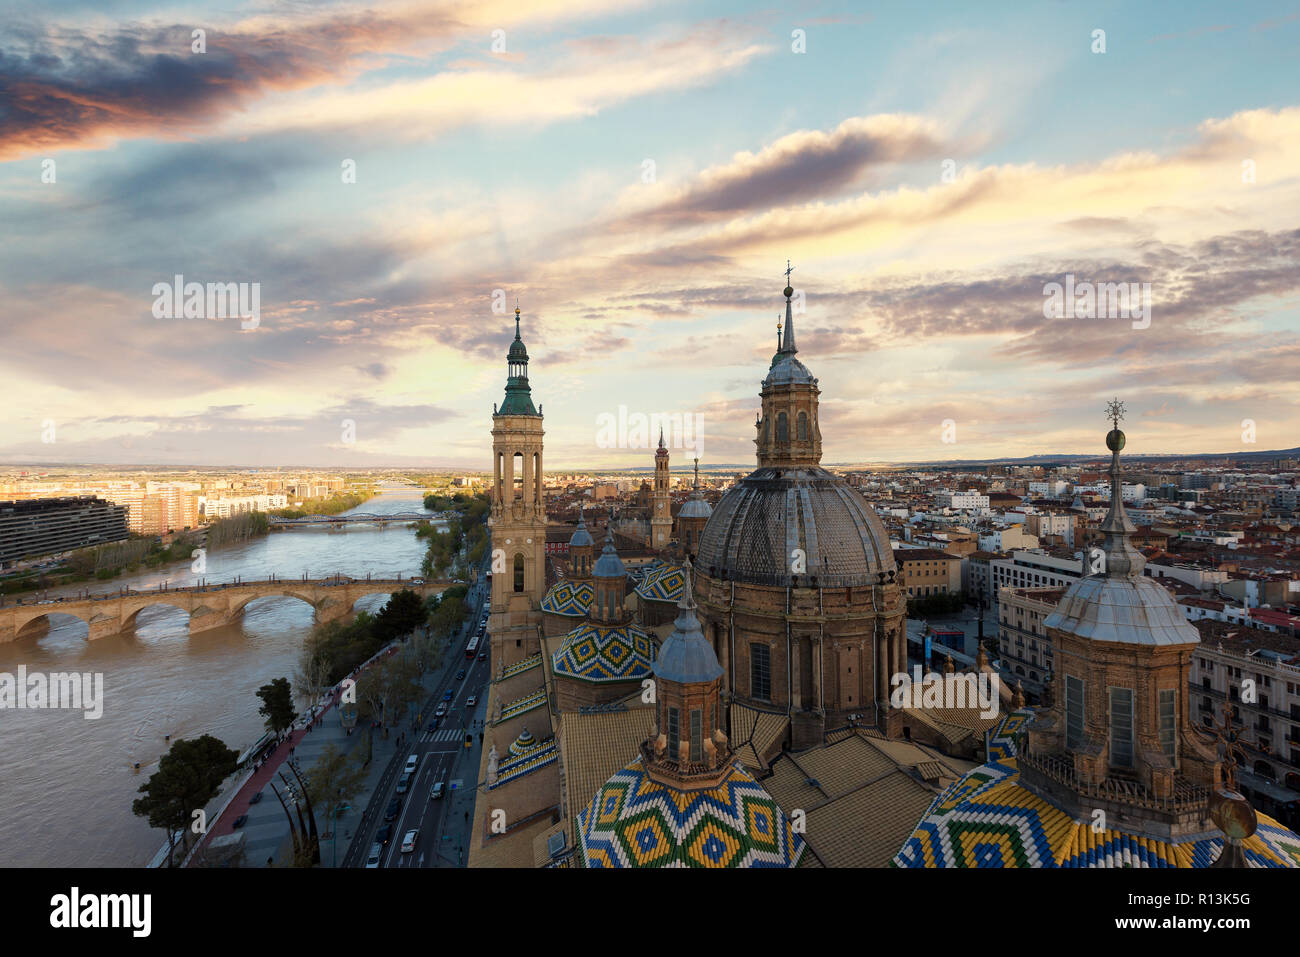 A beautiful view of Zaragoza, in Spain, from one of the towers of the Pilar Basilica near to Ebro river. A huge cathedral near to the river is the mos Stock Photo